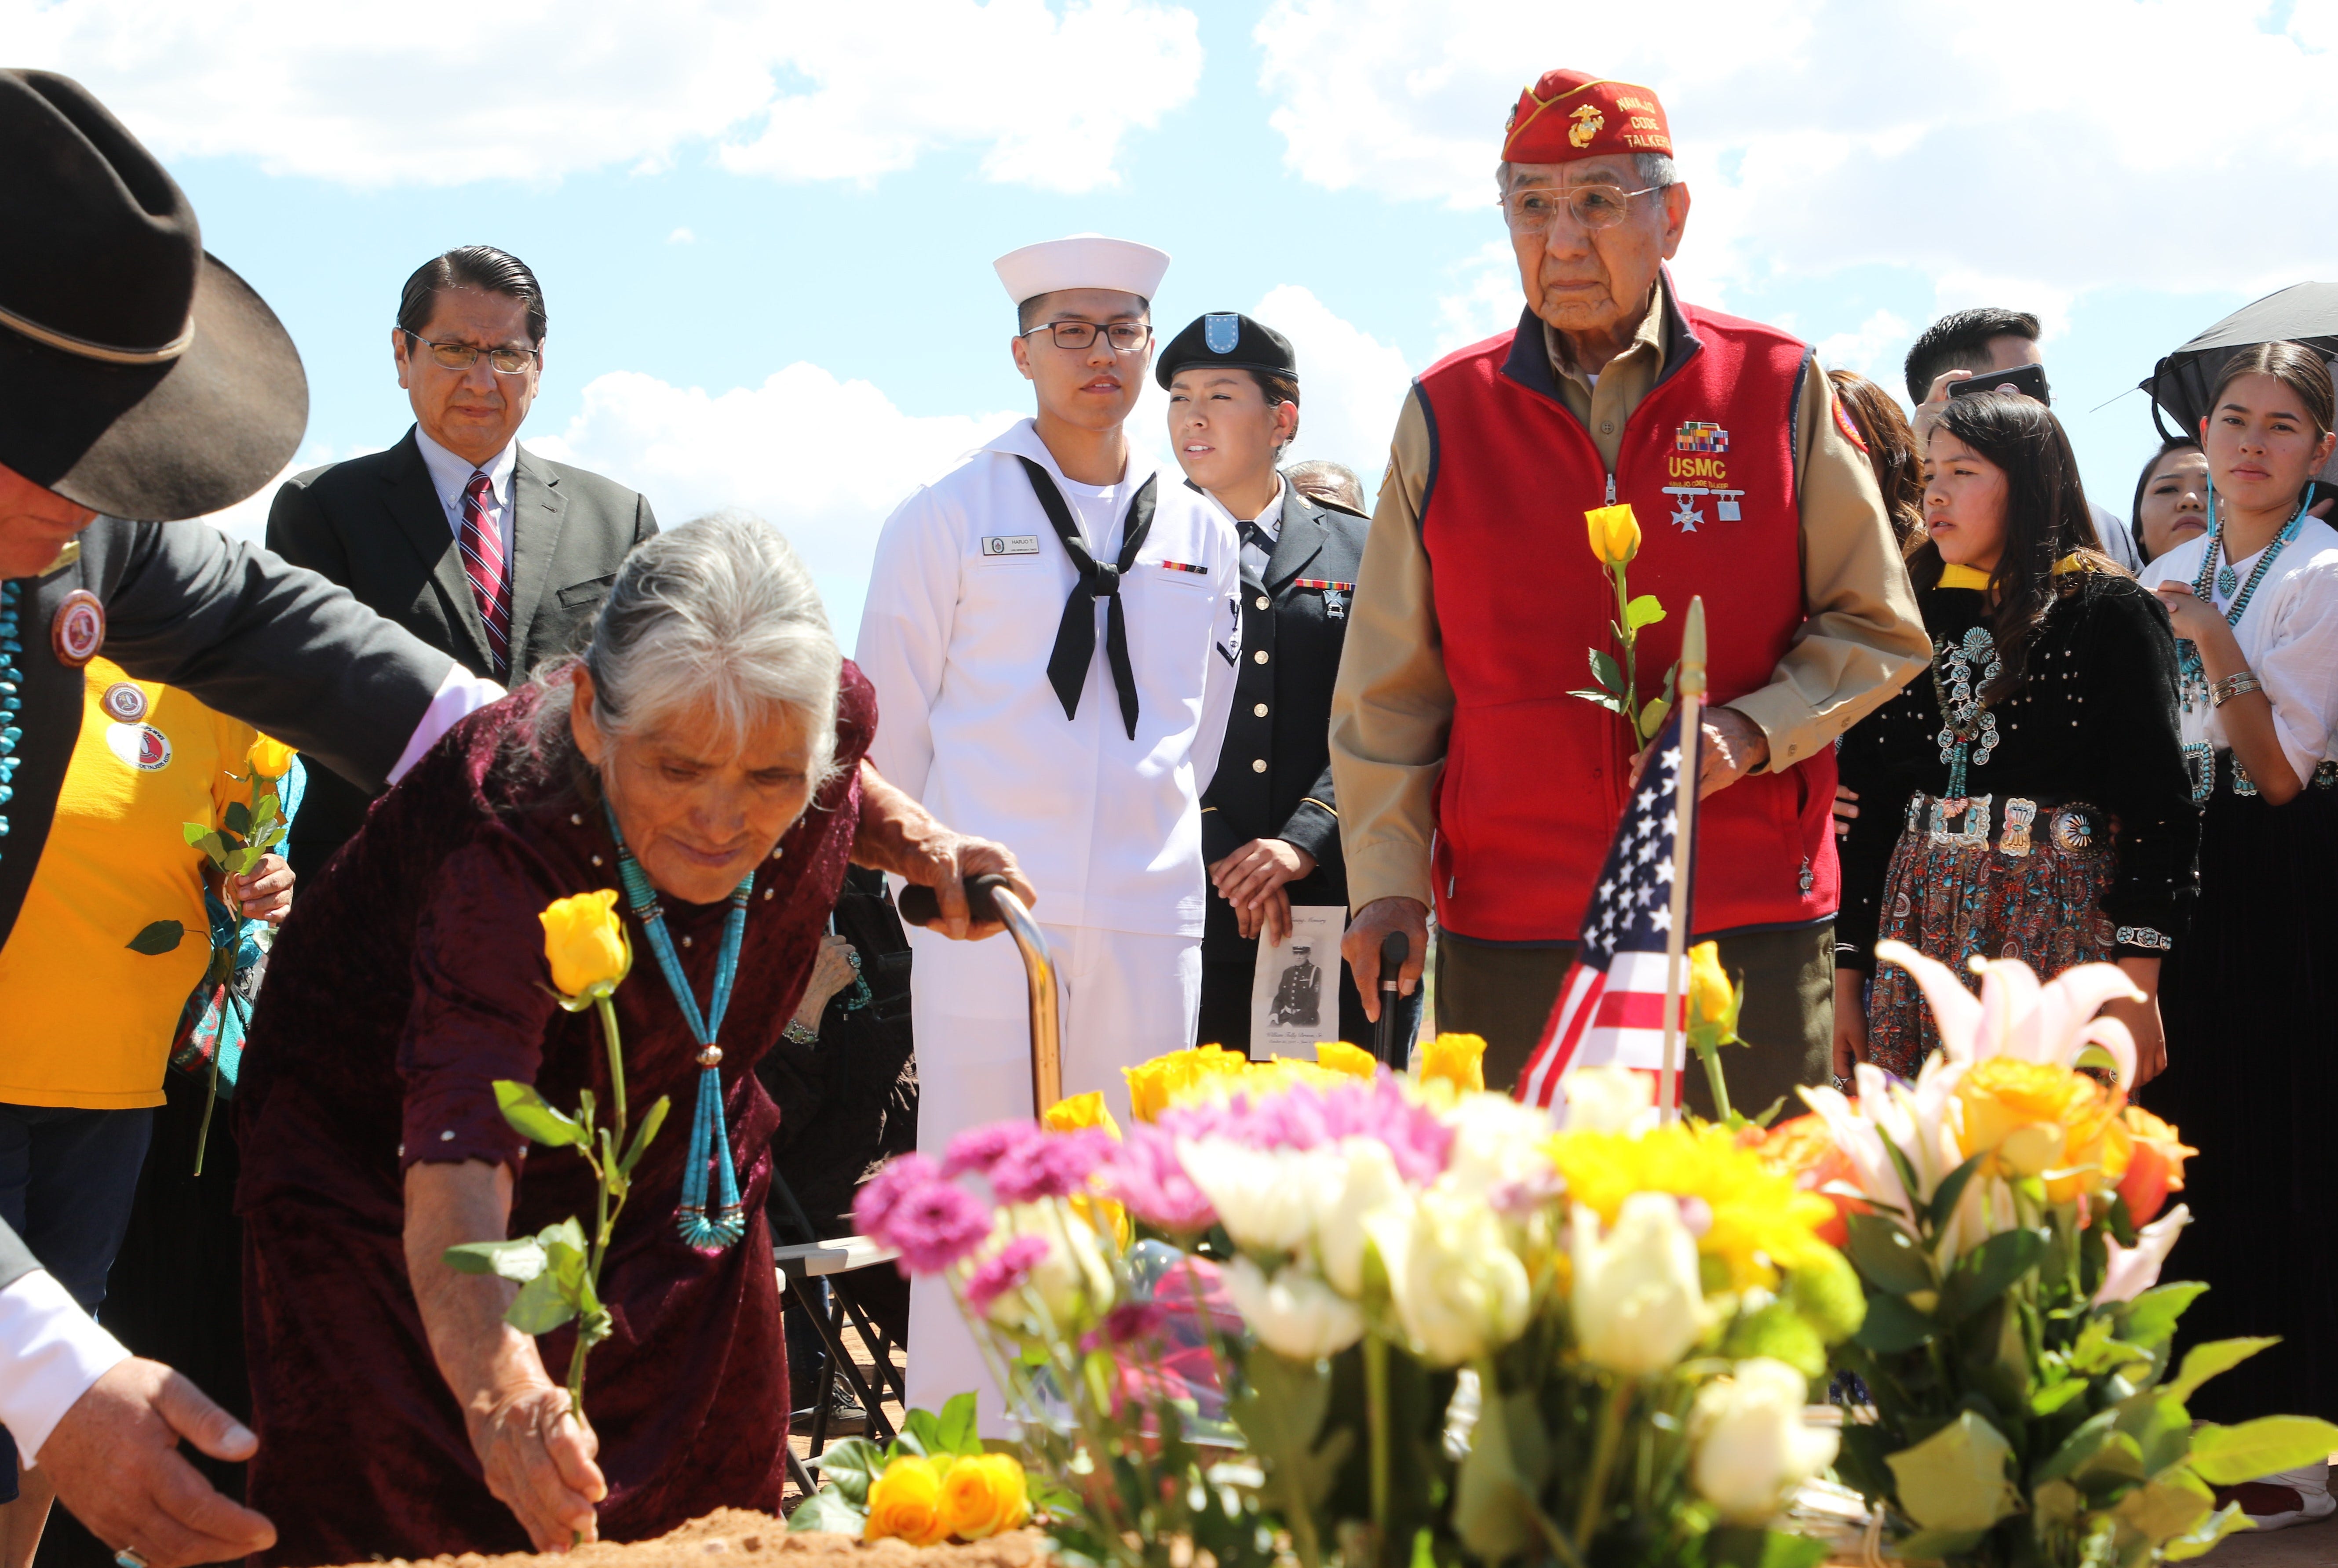 Navajo Code Talker Peter MacDonald Sr. waits to place a rose on the grave of Navajo Code Talker William Tully Brown Sr. on June 6 at the Fort Defiance Veterans Cemetery in Fort Defiance, Ariz.